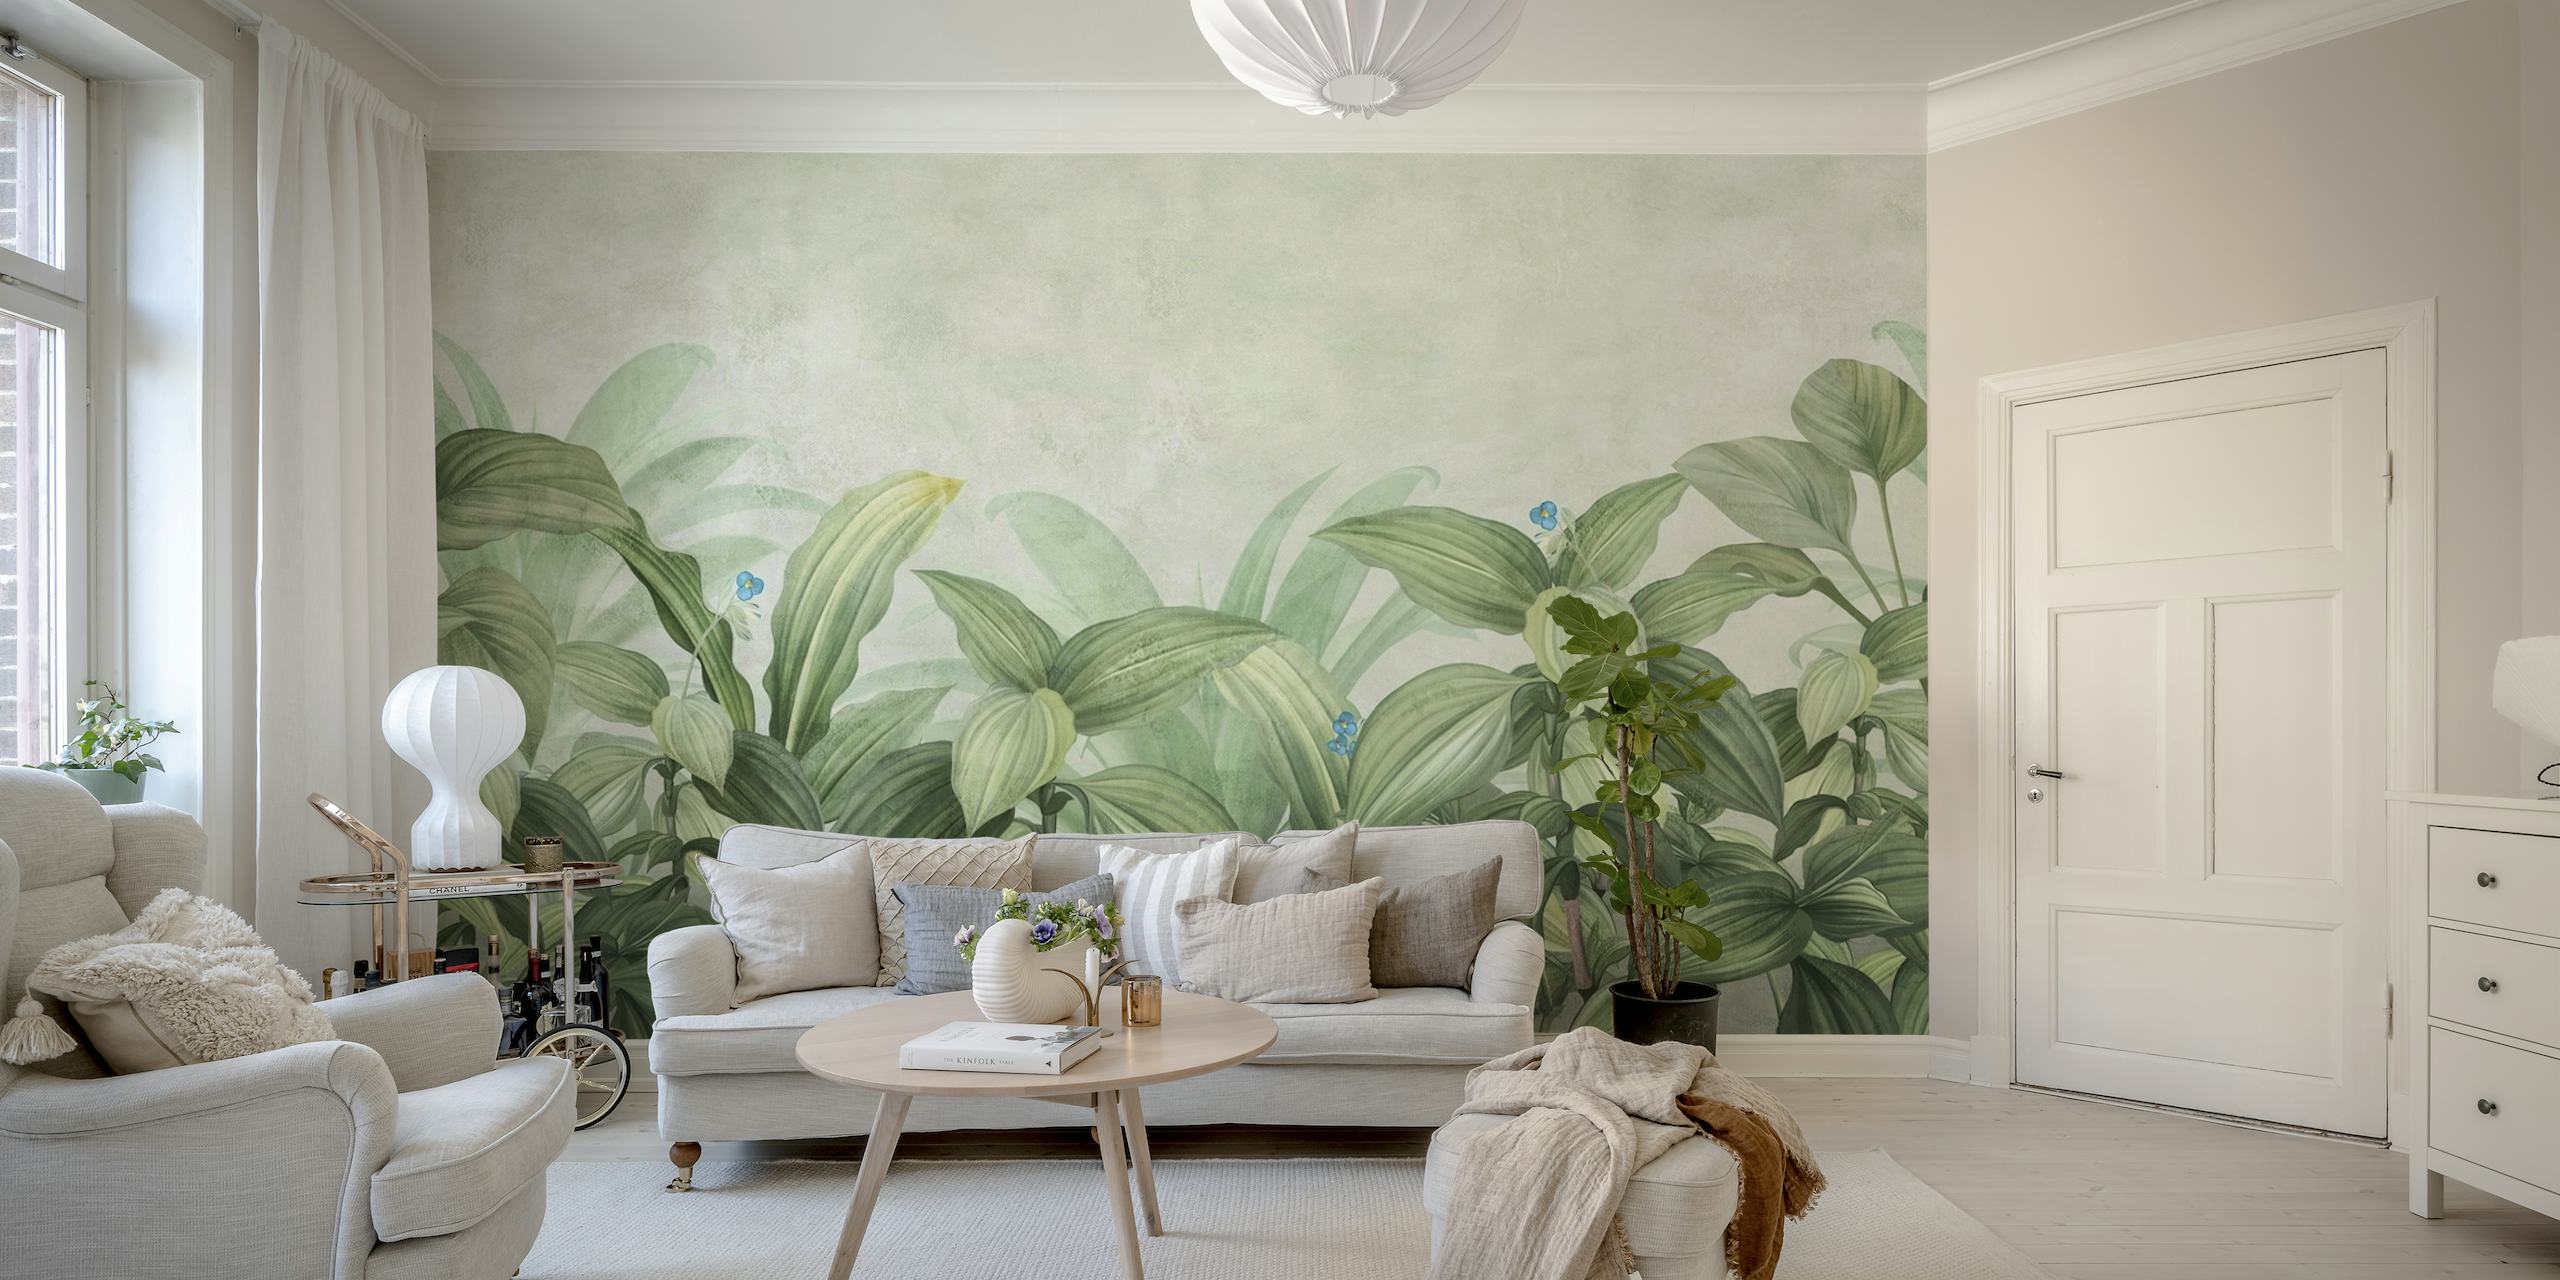 Elegant tropical foliage wall mural with lush green leaves and subtle floral accents